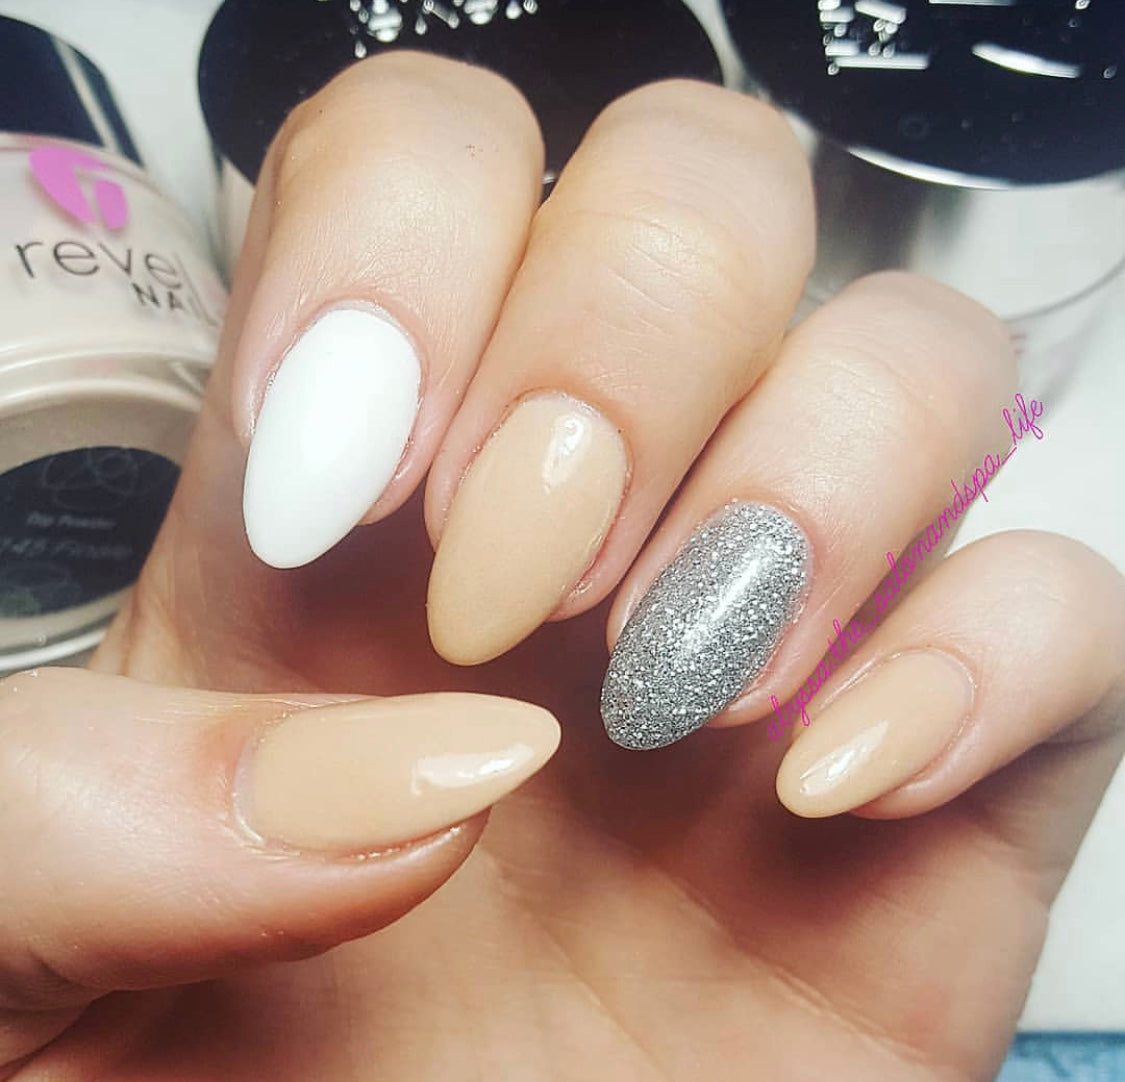 The nail shape dilemma! Which would you choose? ▪️ Round ▫️ Almond  ▪️Stiletto ▫️Coffin Comment below 👇🏻 @tammytaylorzimbabwe | Instagram